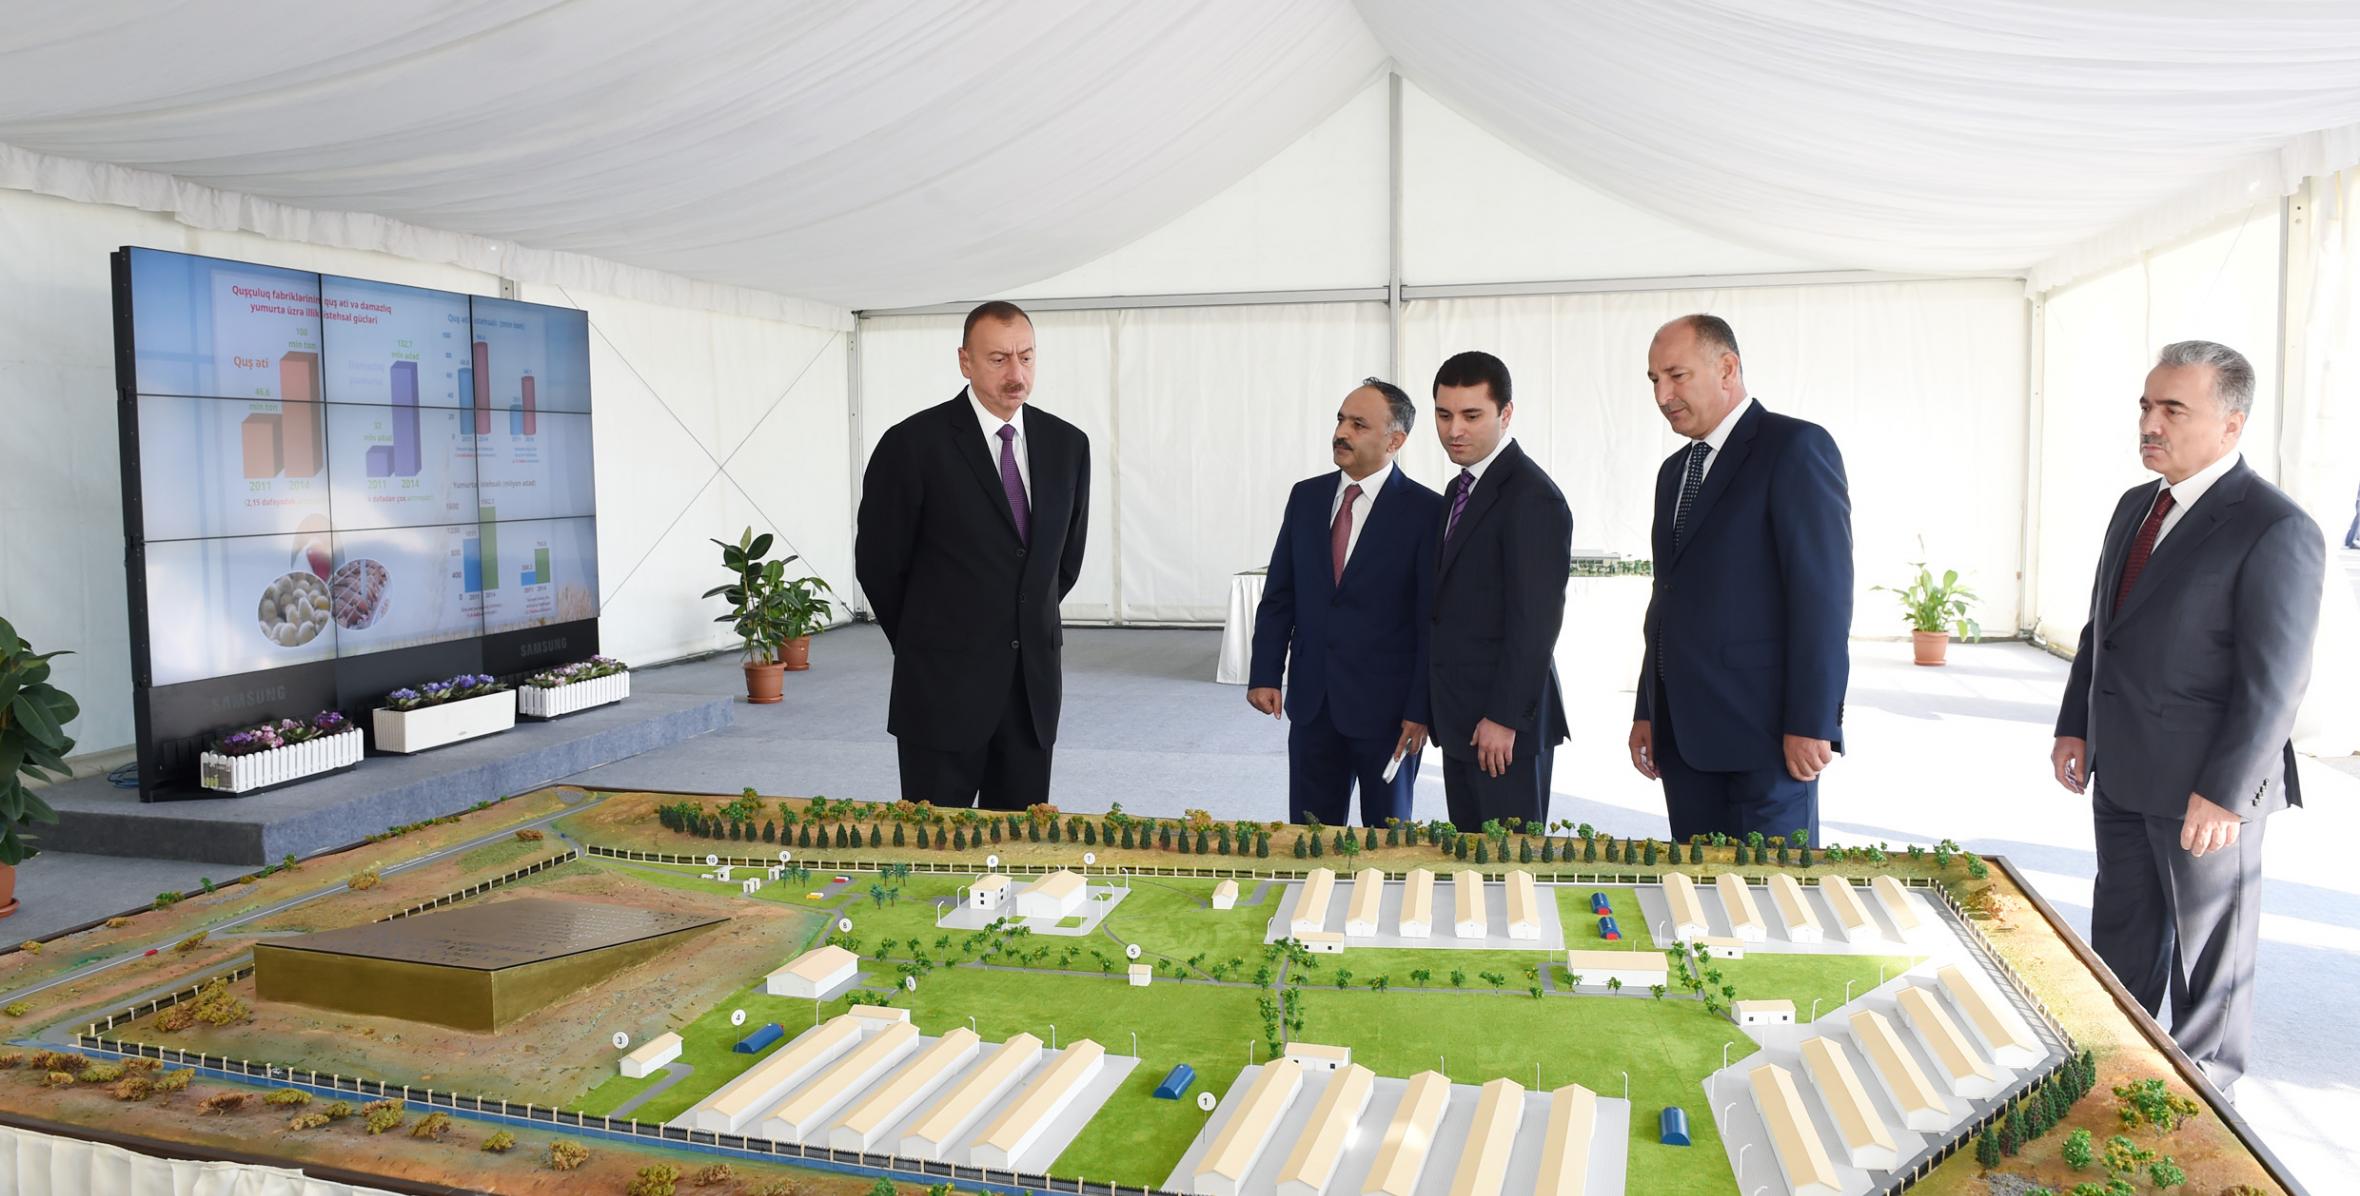 Ilham Aliyev reviewed the Poultry Farming Complex of "Ujar Agro" Ltd